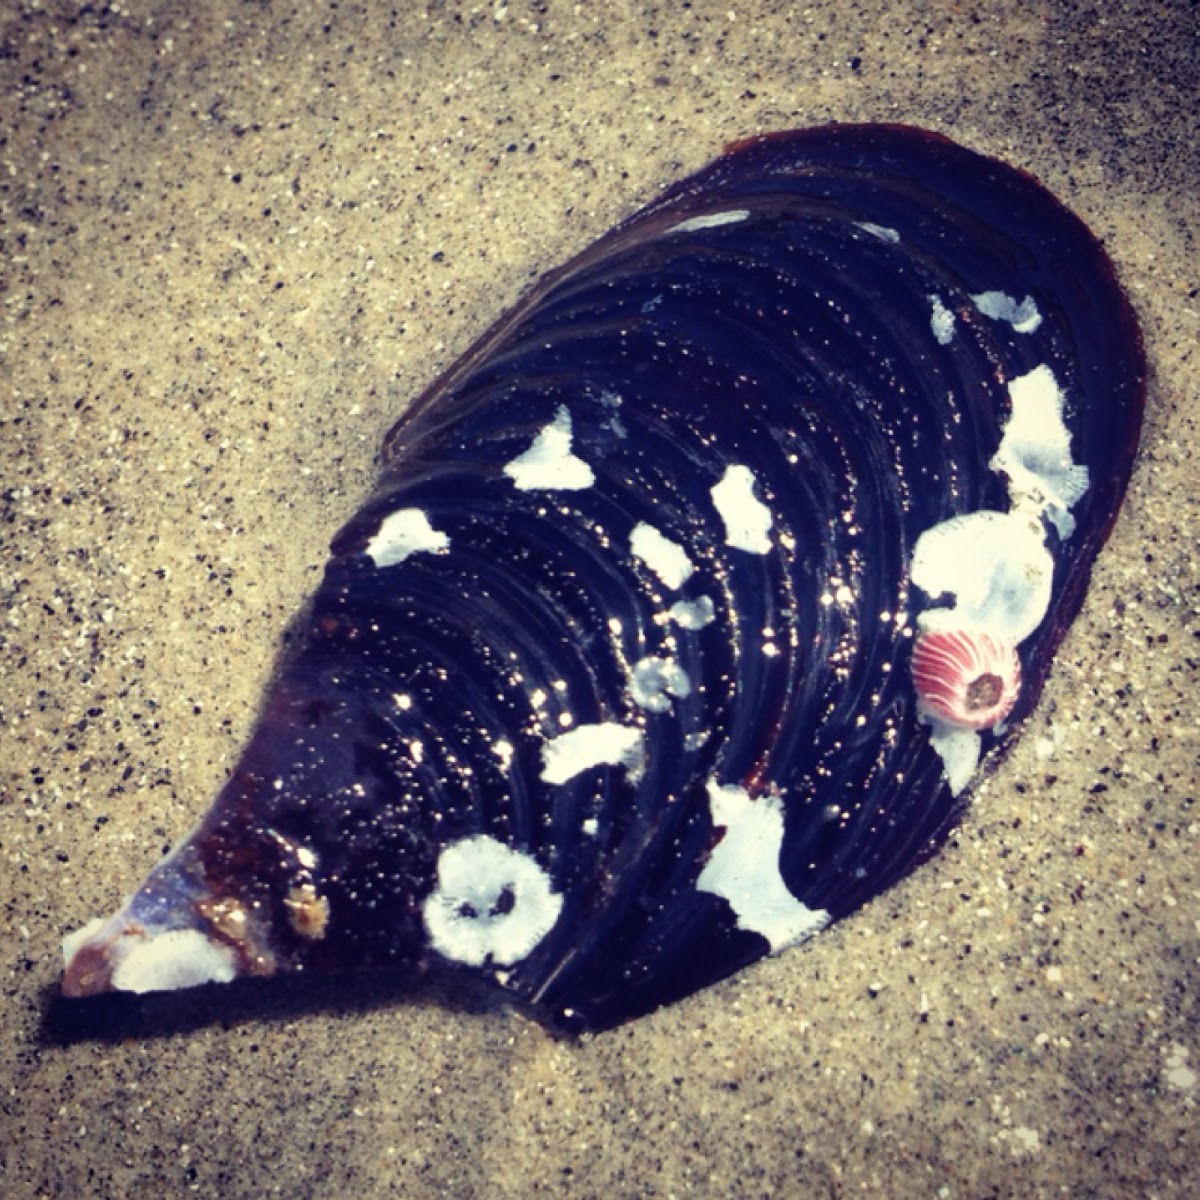 Mussel shell and barnacle